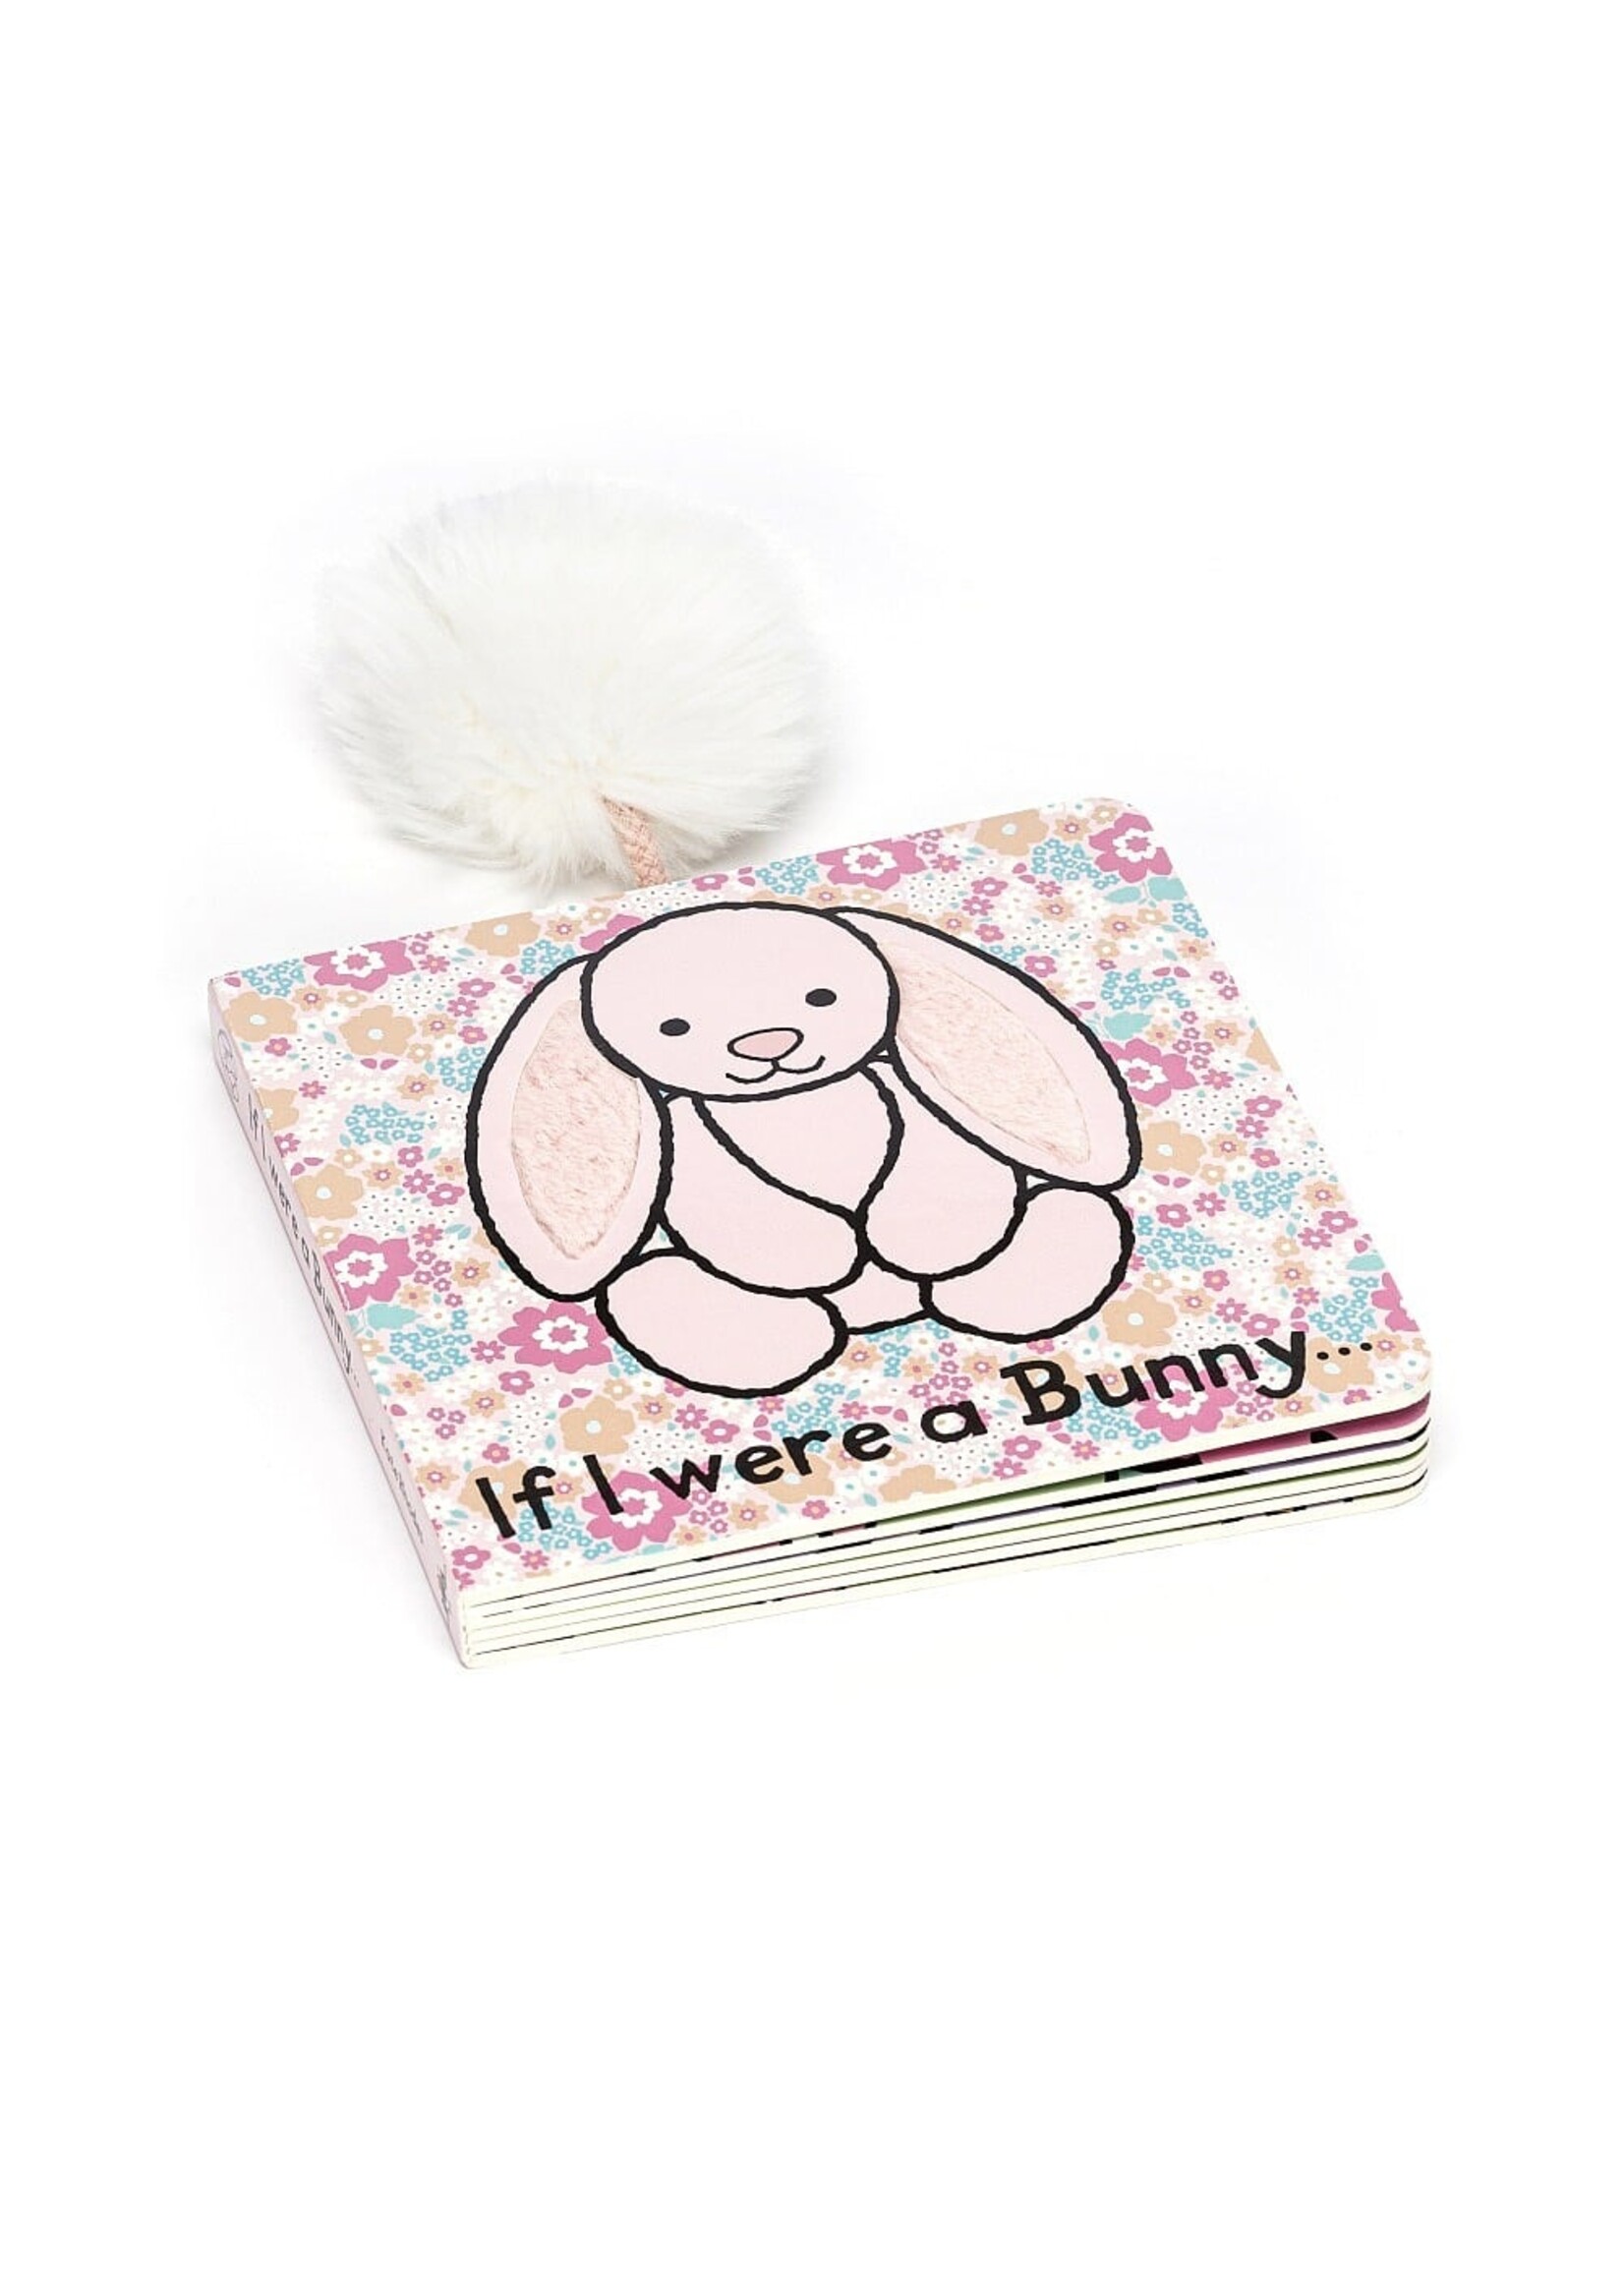 Jellycat "If I Were A Bunny"